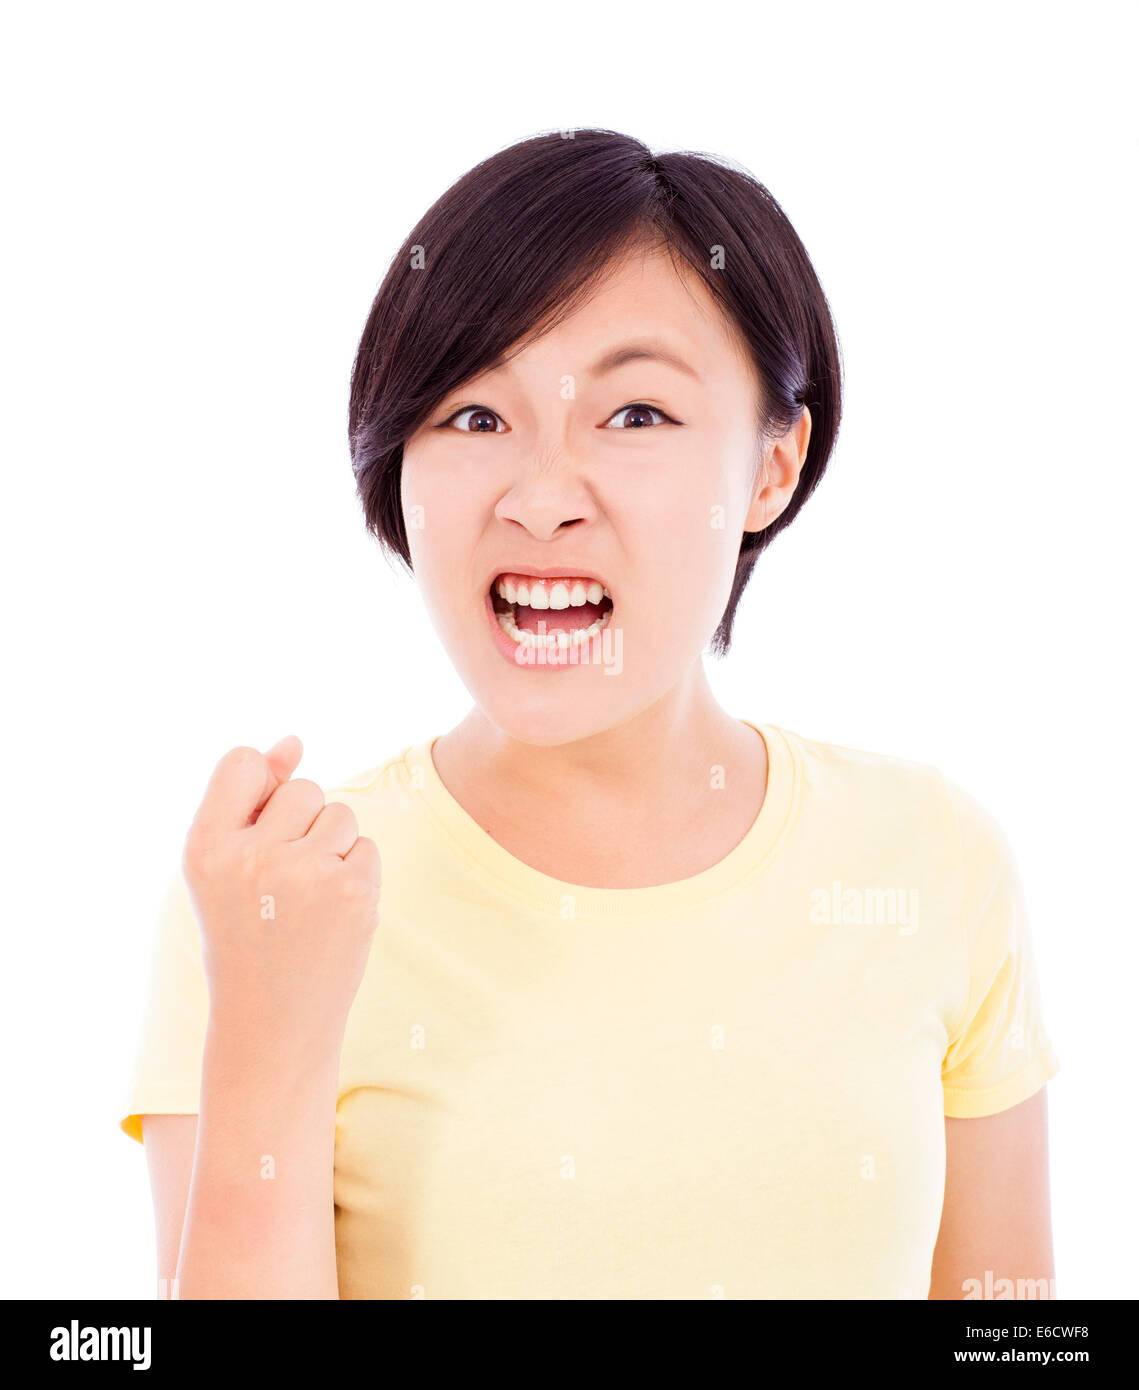 closeup of young girl angry facial expression Stock Photo